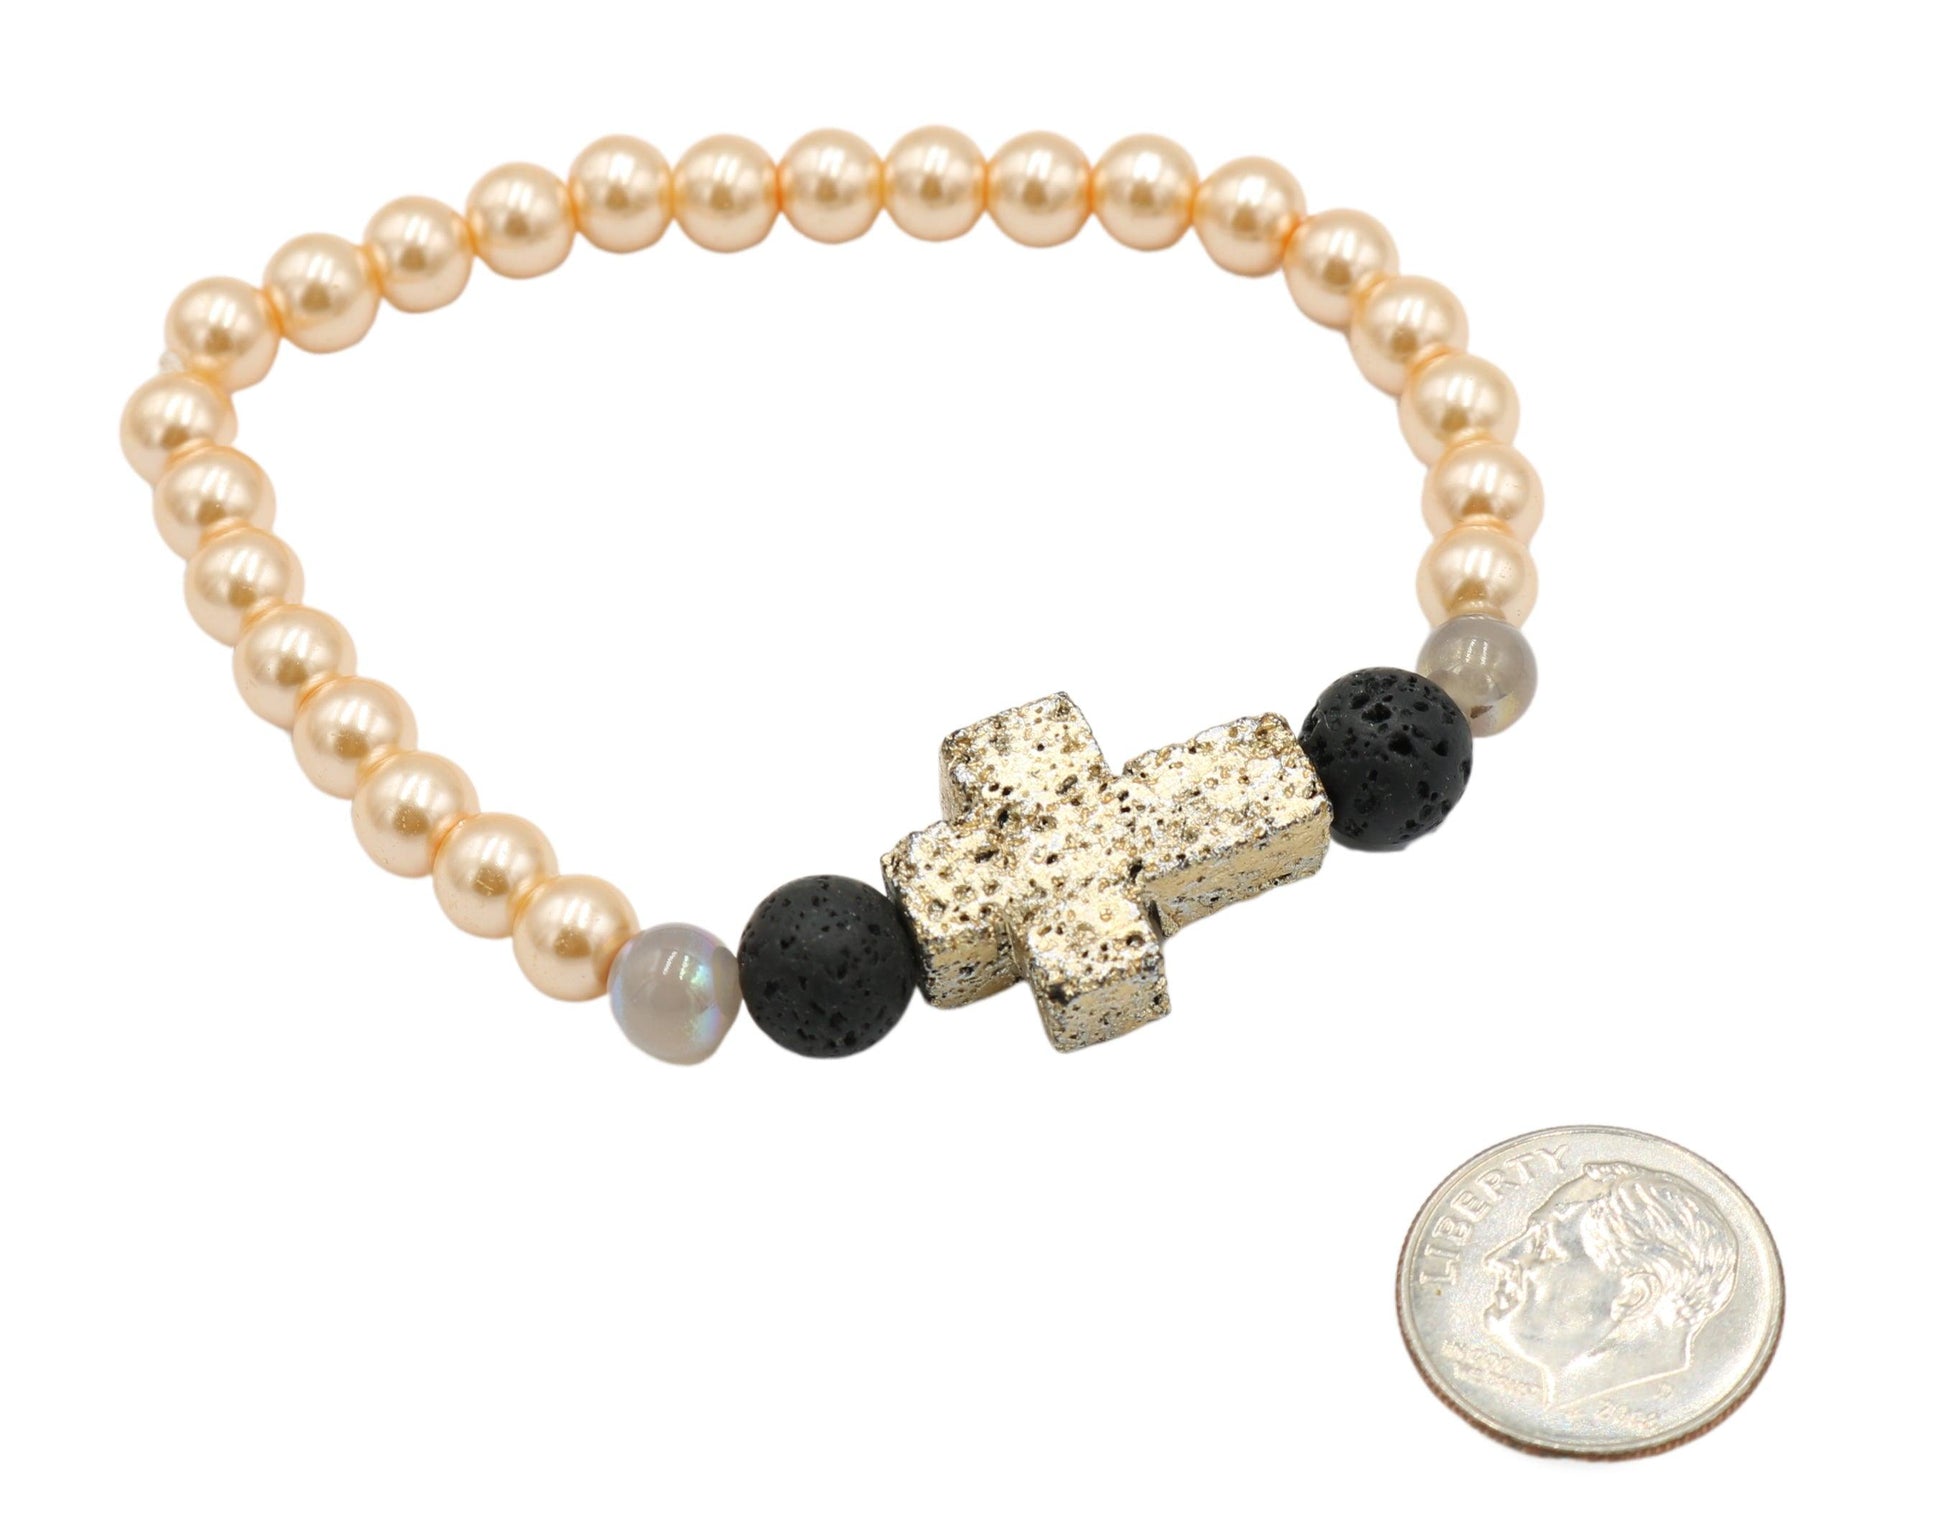 At The Cross - Easter Morning - Yellow Gold and Rose Gold Easter Women's Stretch Bracelet Coin Size Comparison